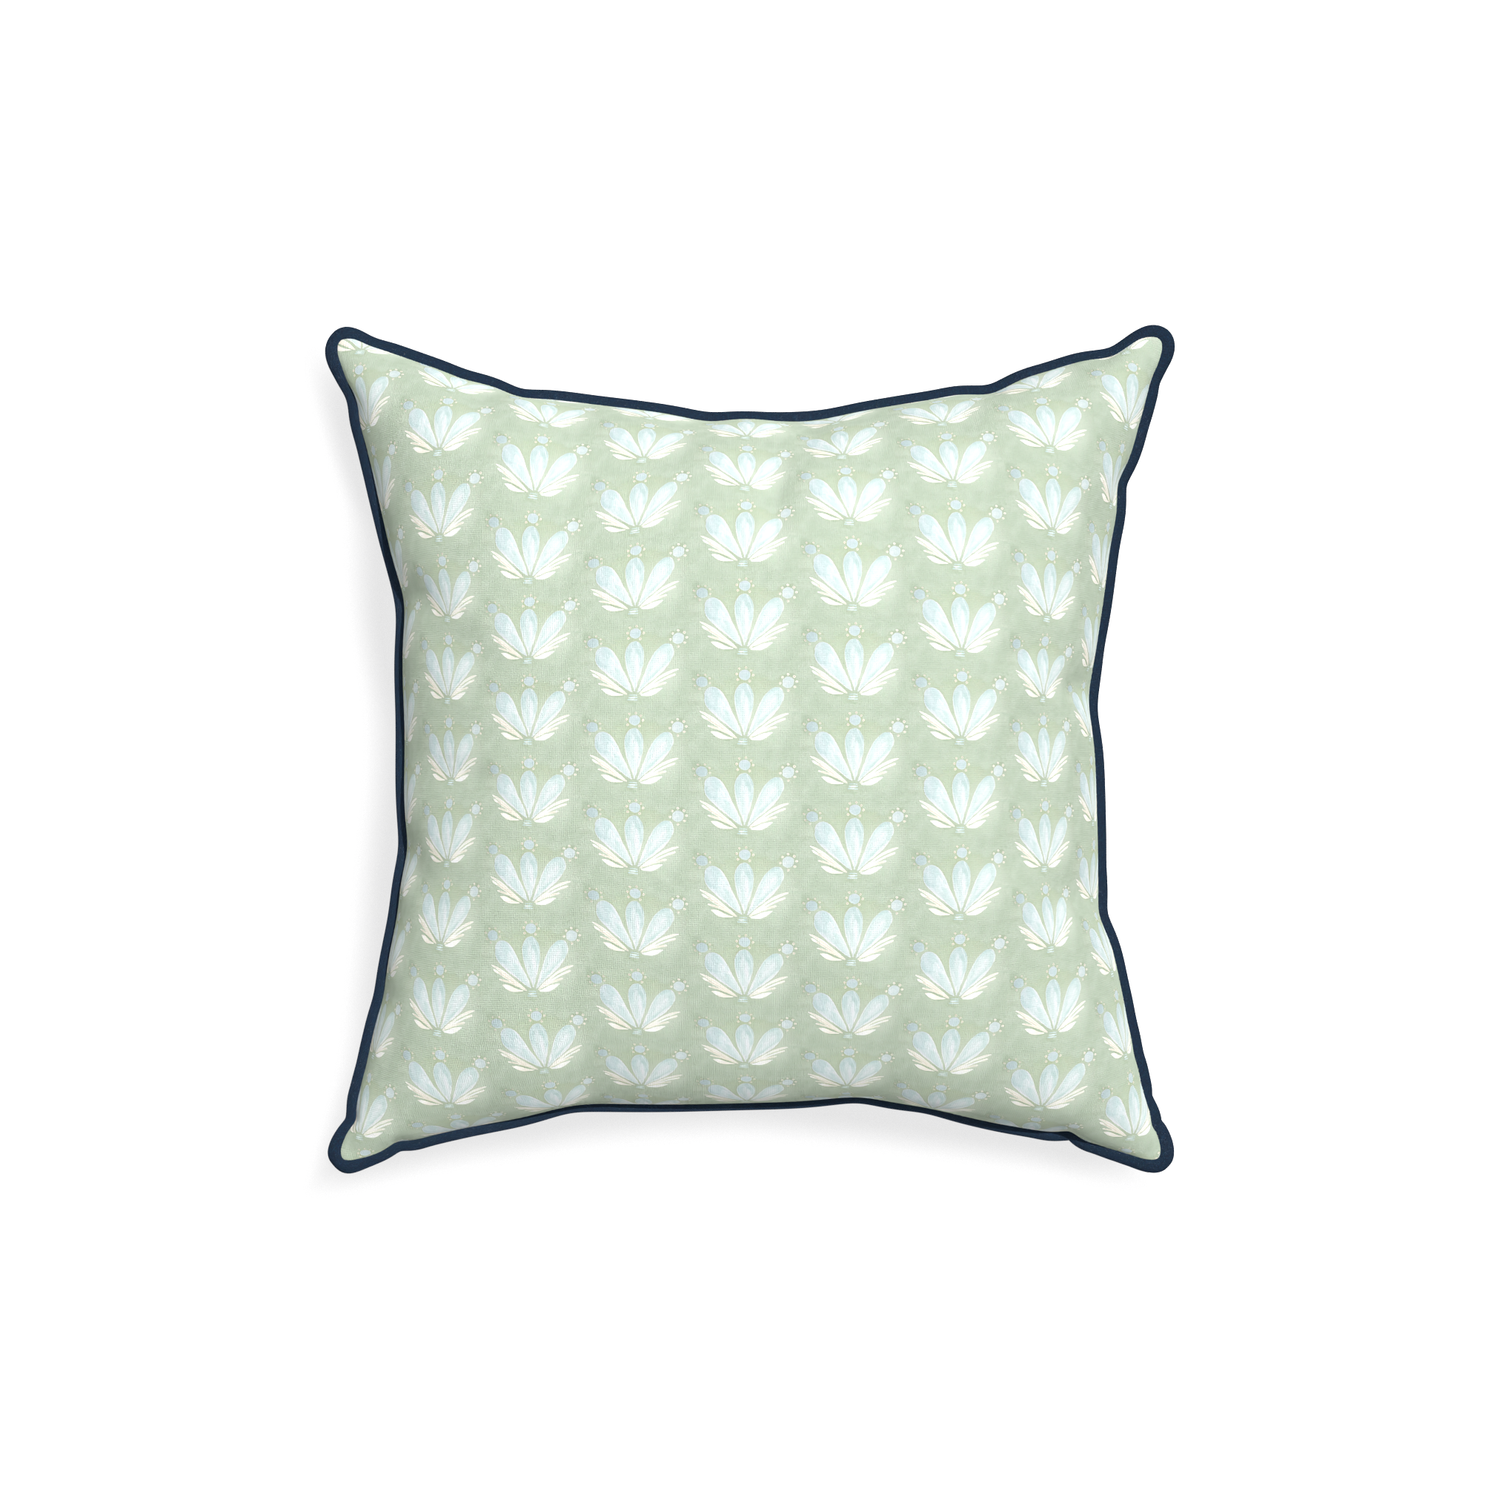 18-square serena sea salt custom blue & green floral drop repeatpillow with c piping on white background